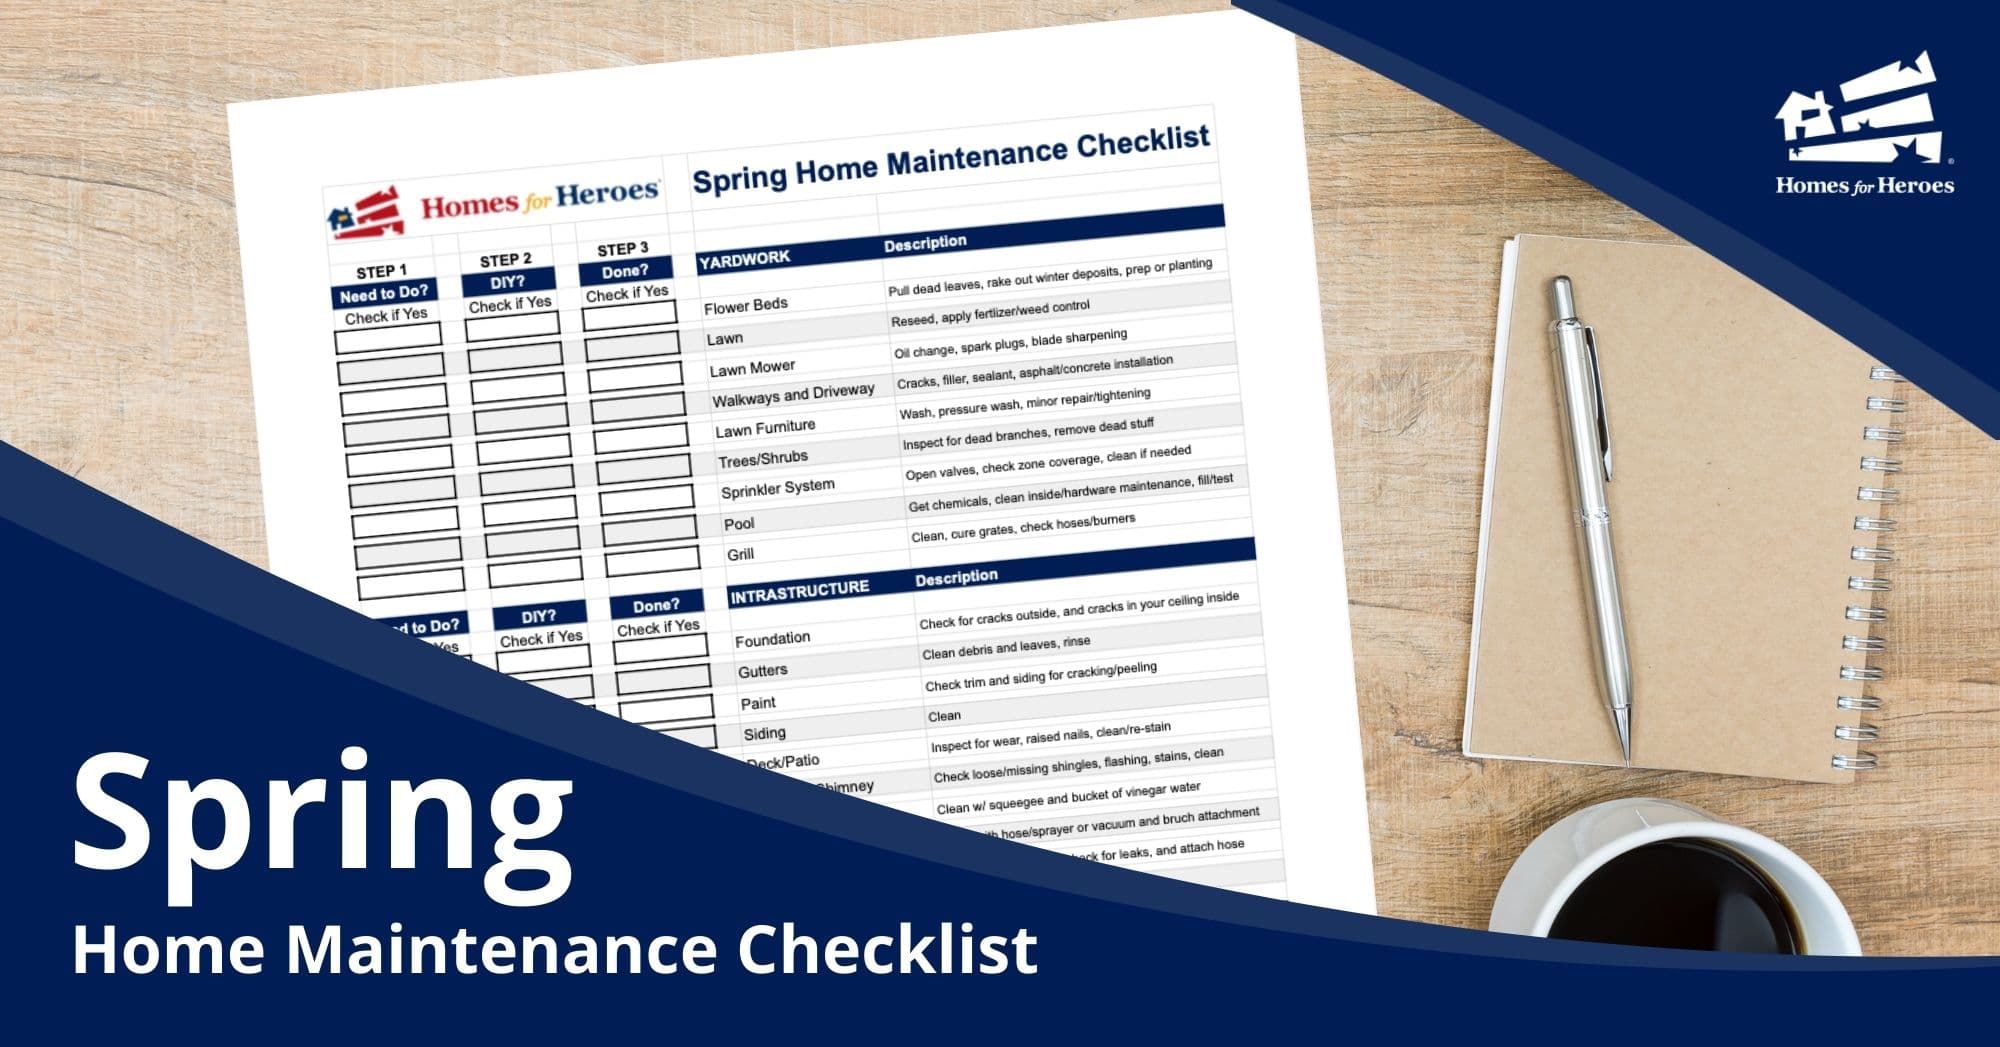 Spring Home Maintenance Checklist Download Homes for Heroes